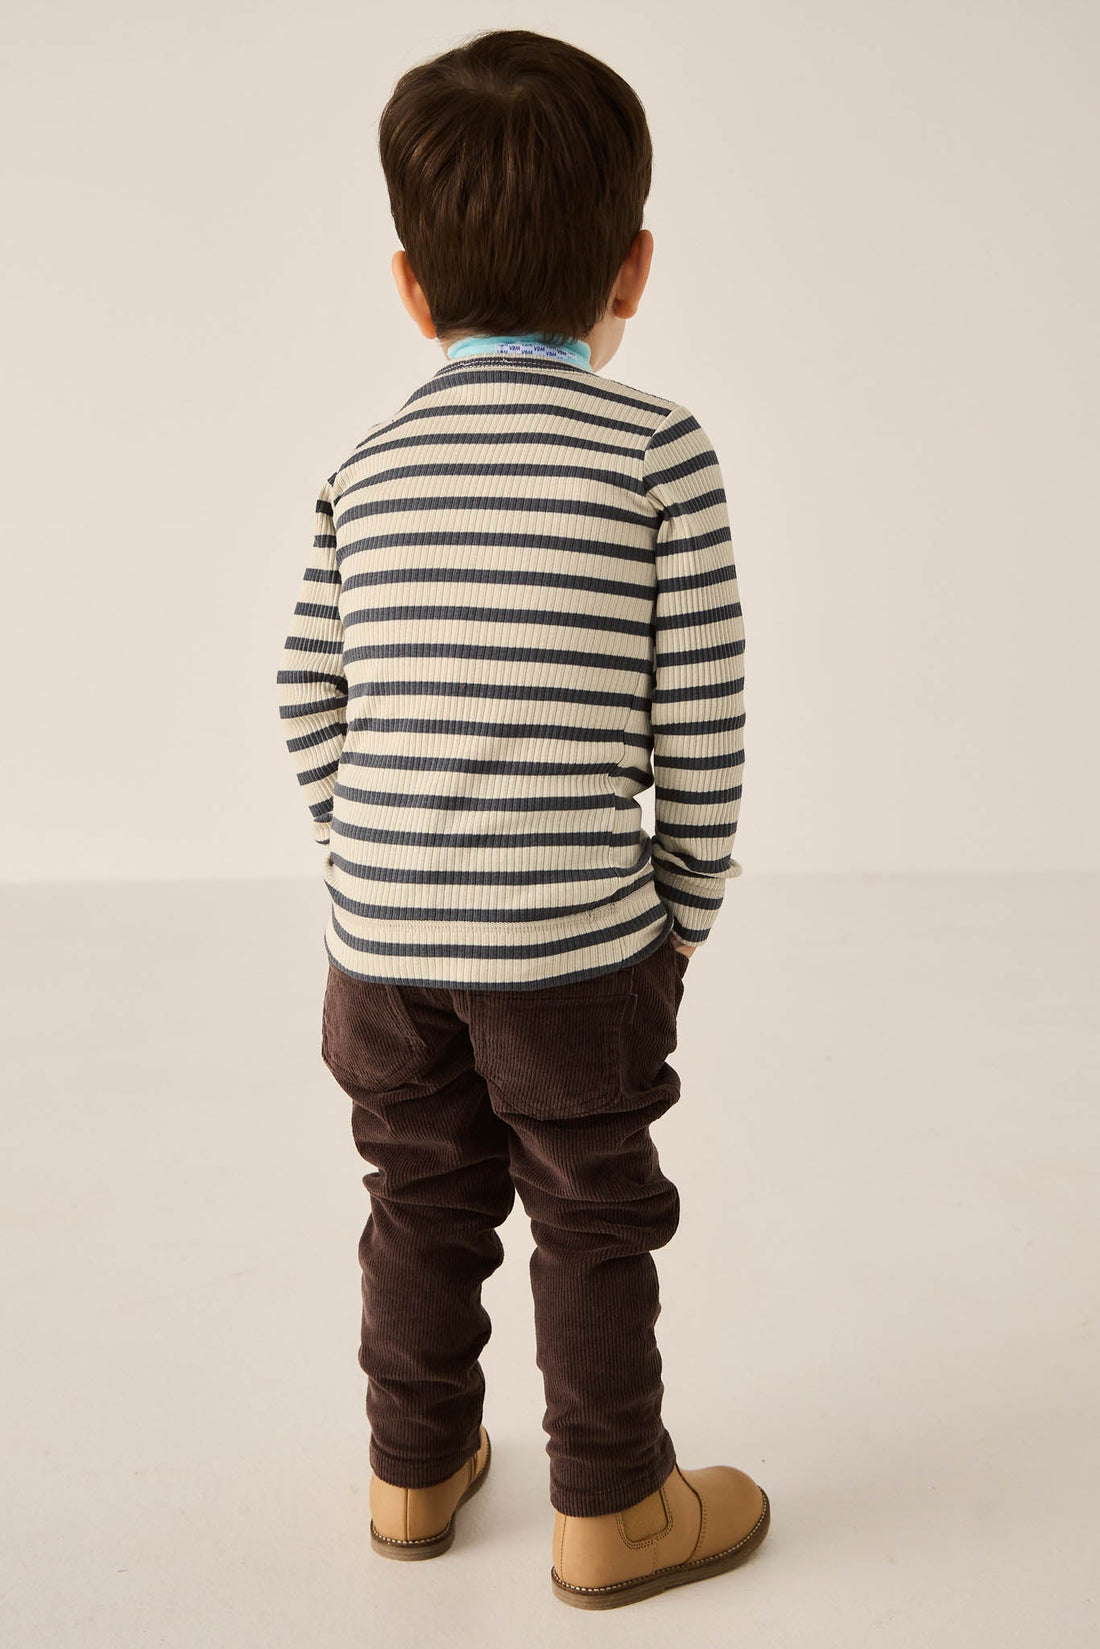 Austin Woven Pant - Bear Childrens Pant from Jamie Kay USA